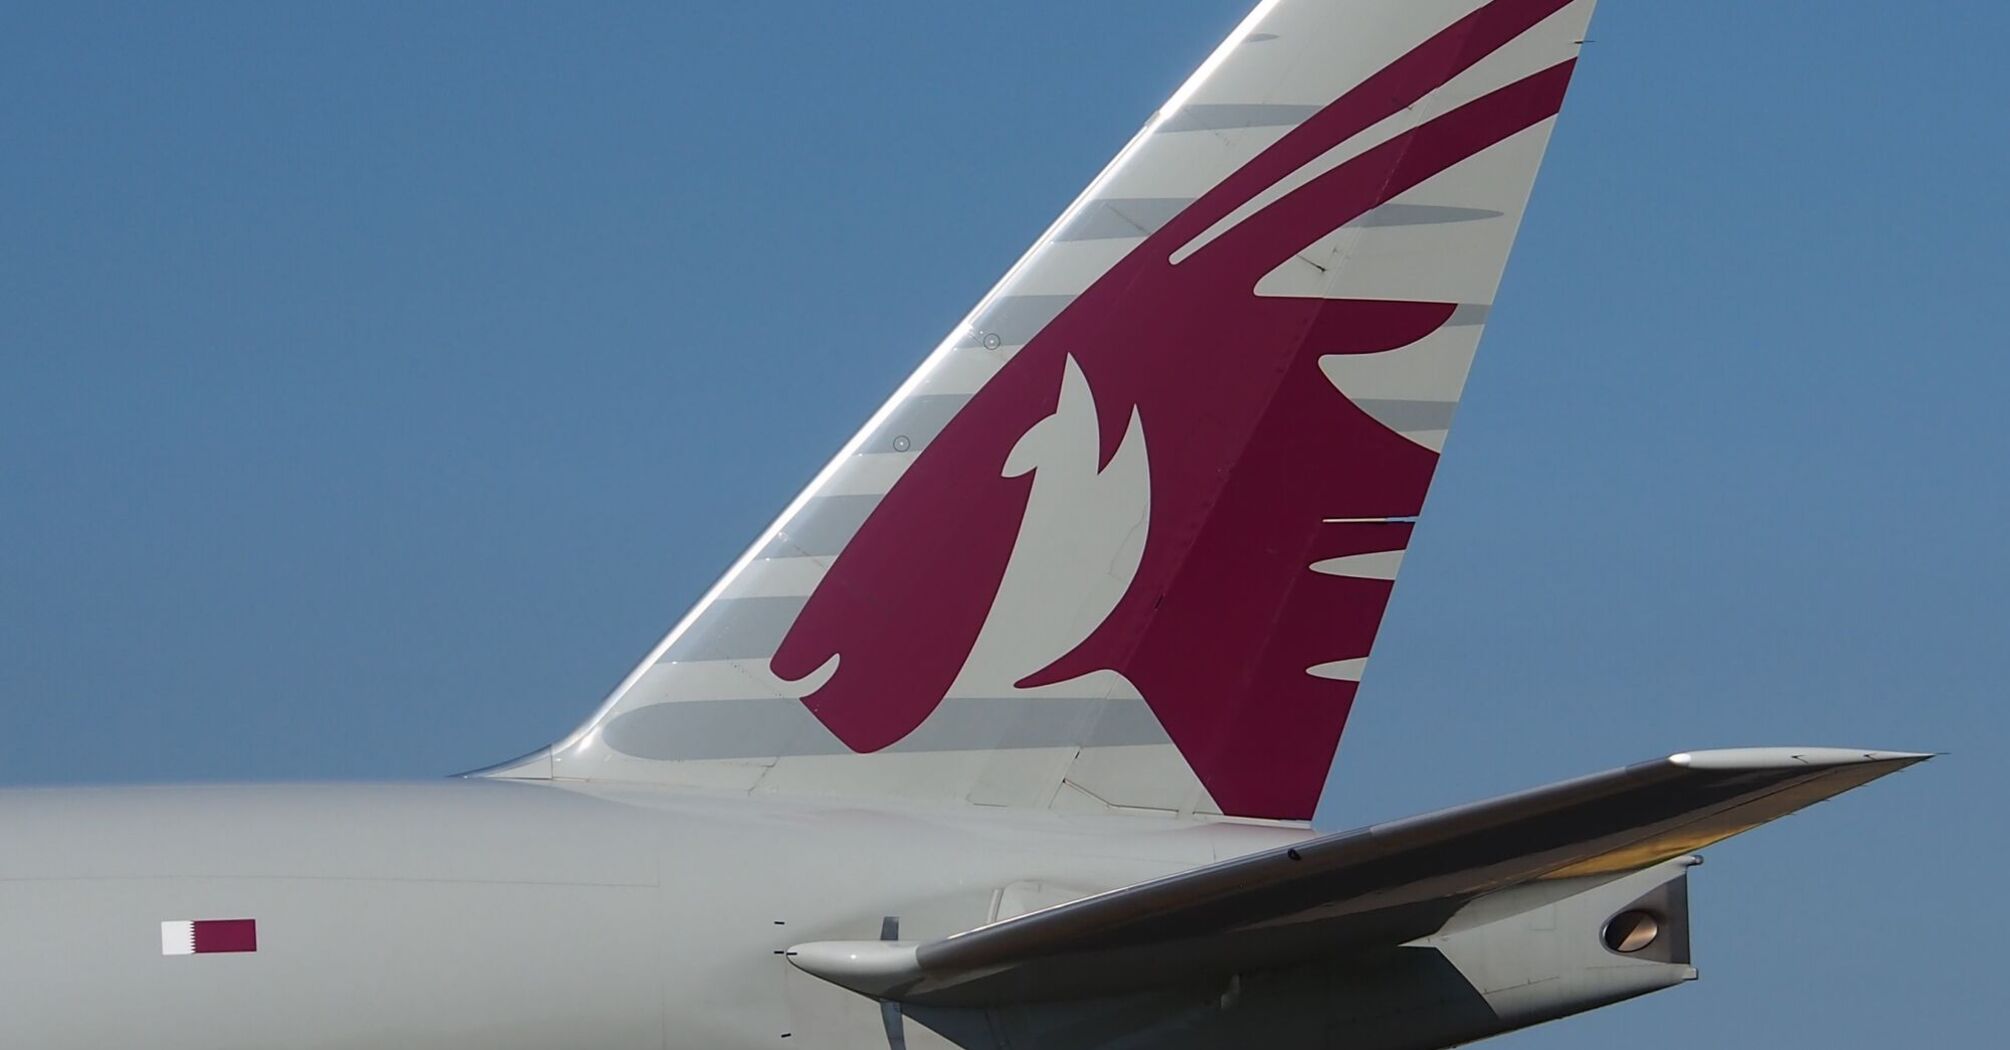 An image of the tail of a Qatar Airways aircraft with the airline's logo, set against a clear blue sky